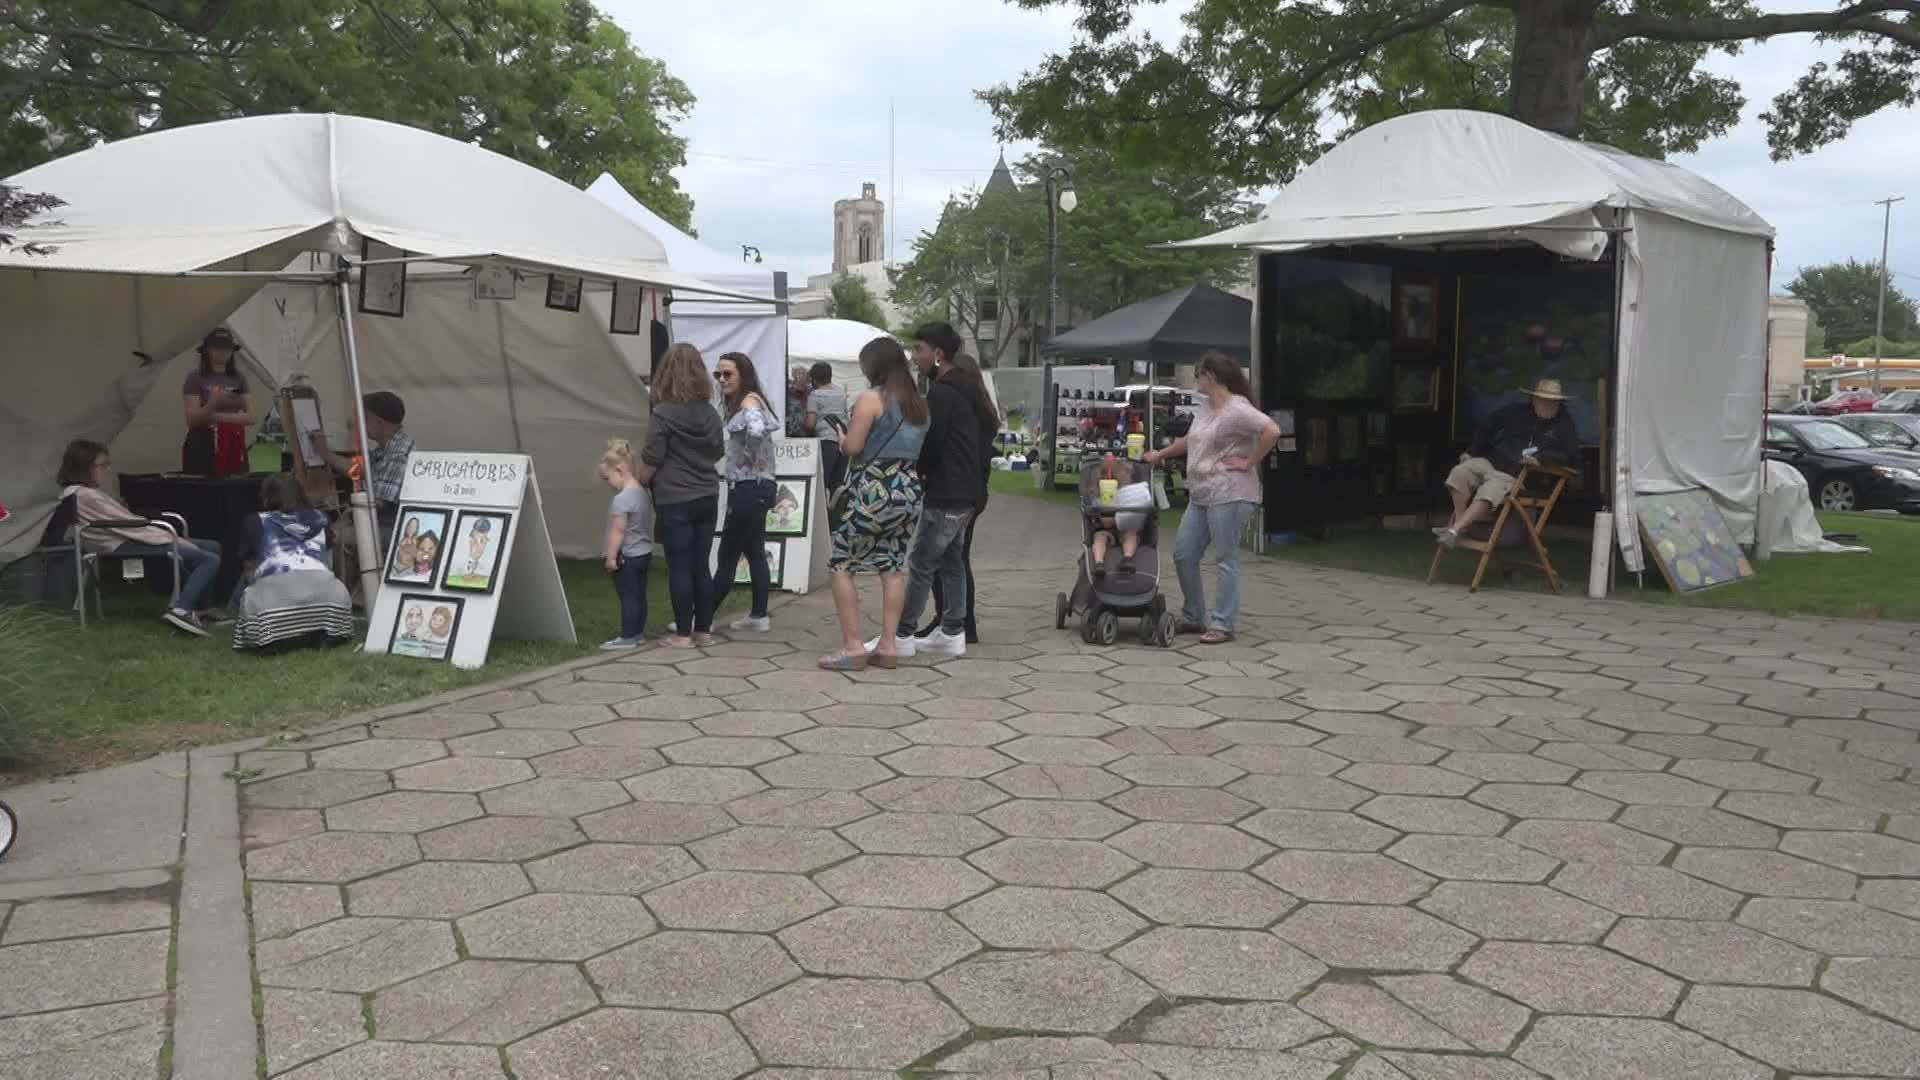 The Lakeshore Art Festival was shut down Saturday due to storms, but art vendors were back at it Sunday.